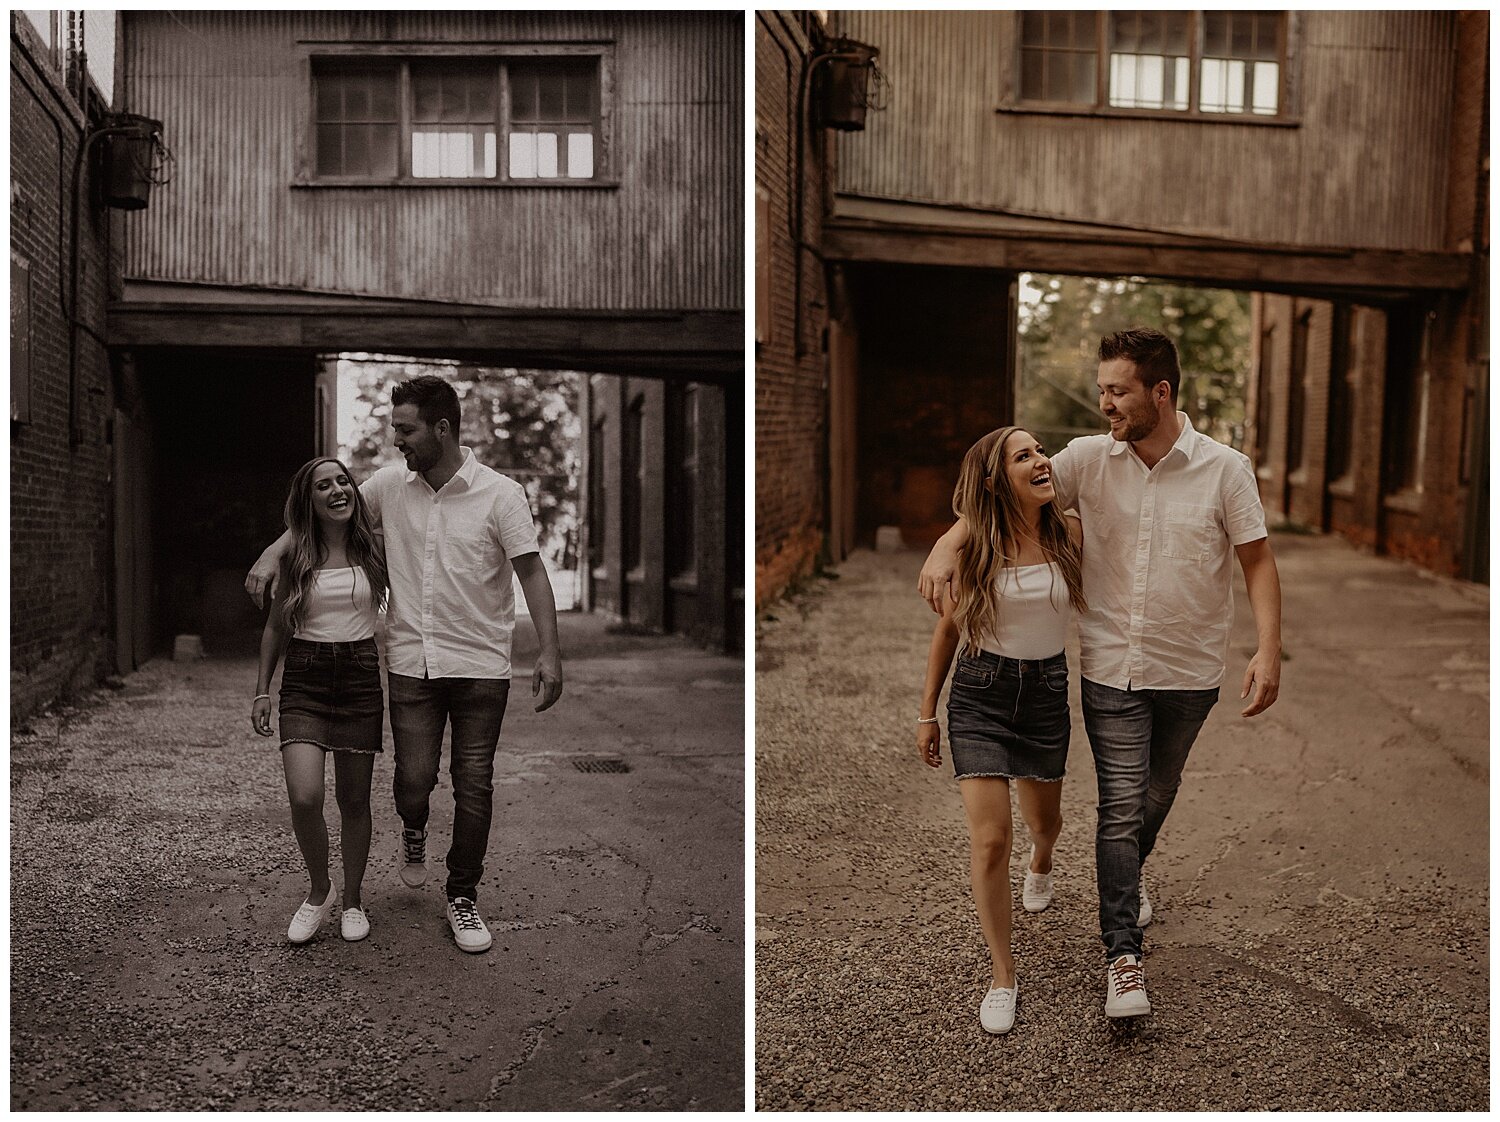 Cotton_Factory_And_Waterfall_Engagement_Session_Hamilton_Ontario_Wedding_Photographer_0011.jpg